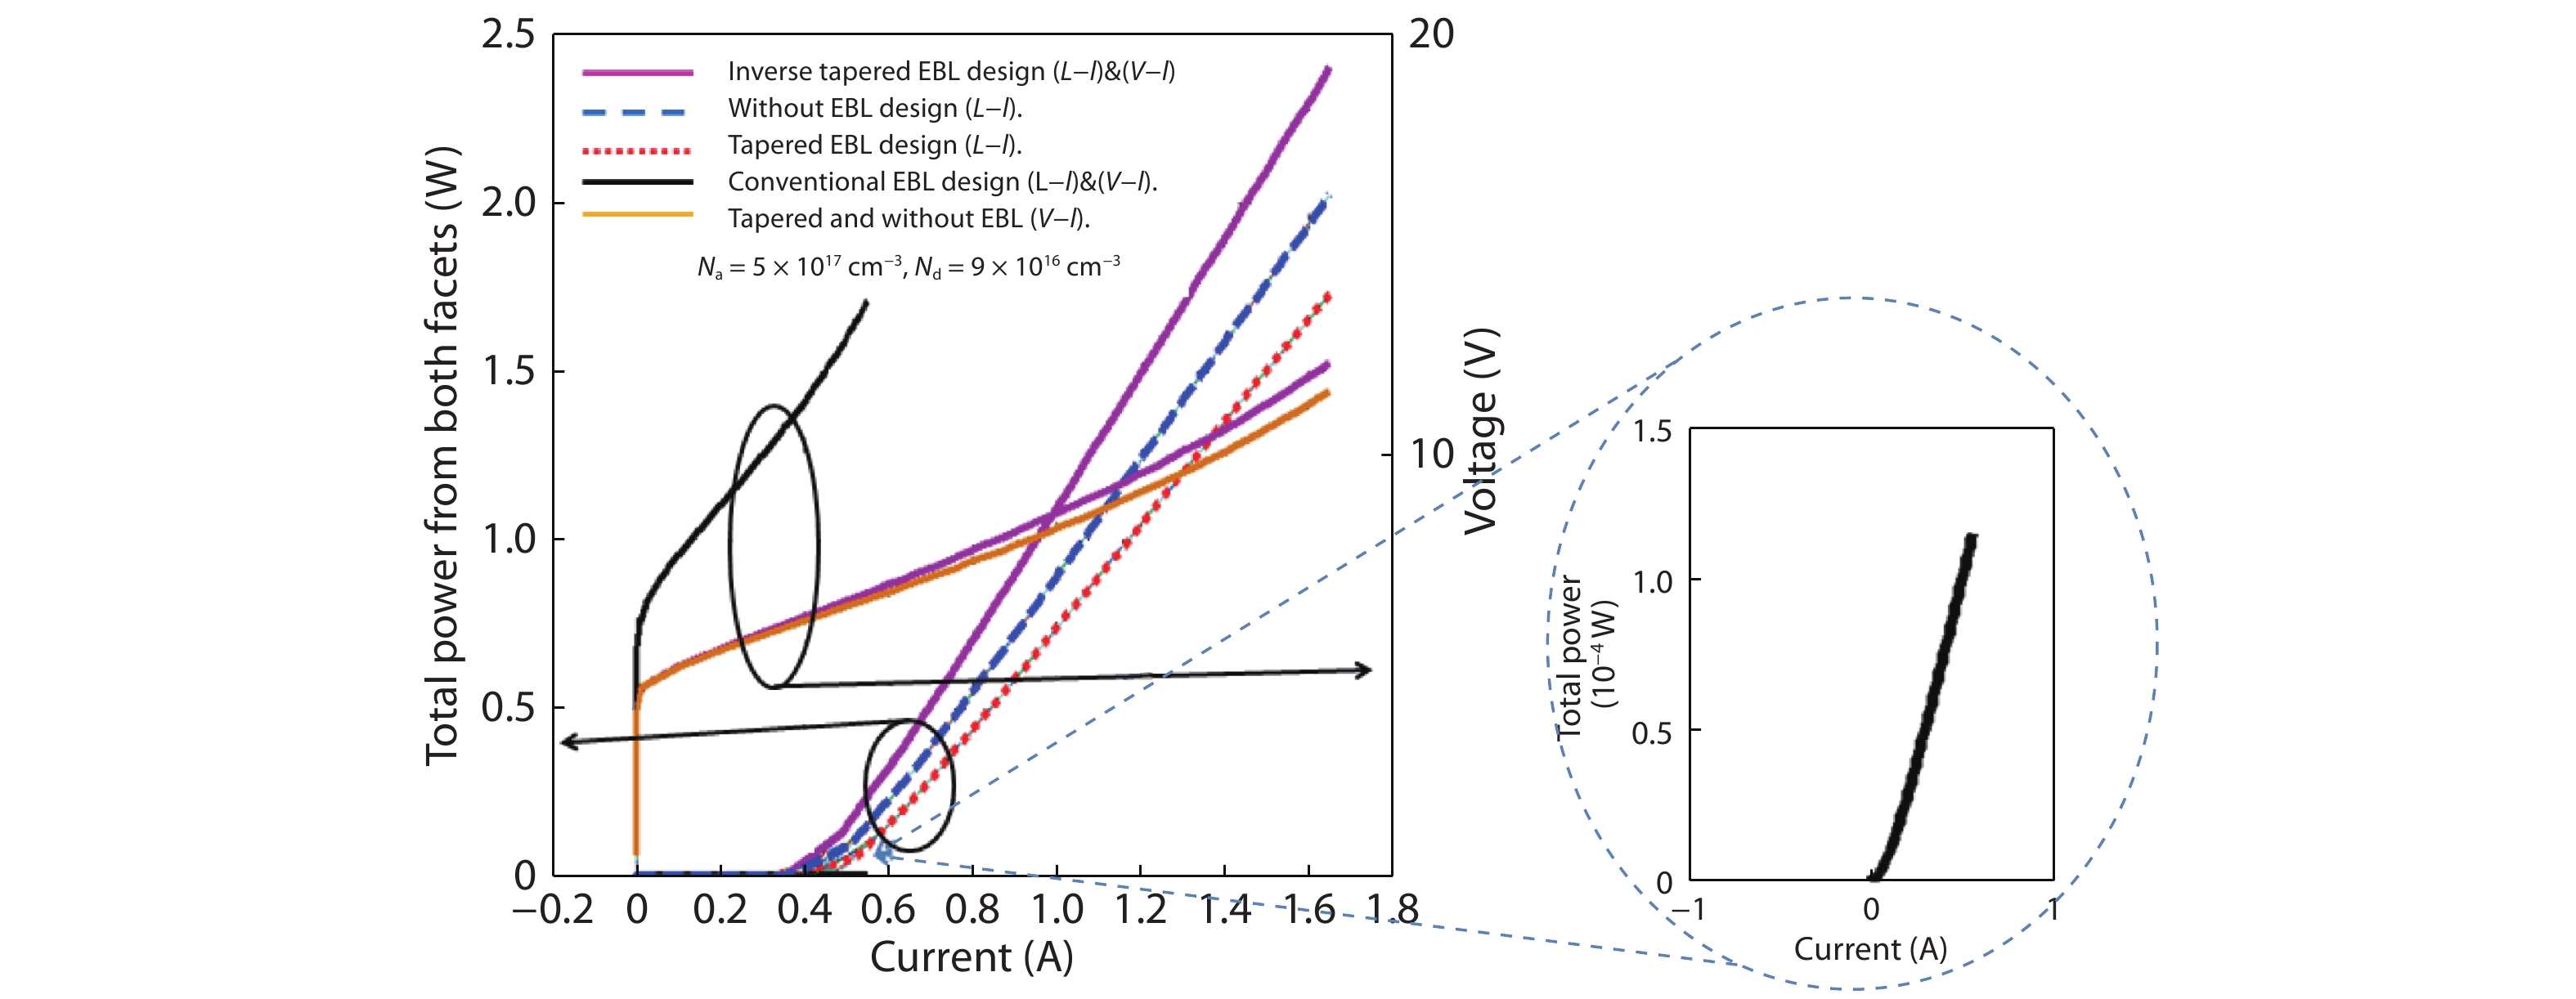 (Color online) Illustrate the L–I and V–I electrical characteristic curves for the conventional EBL, tapered EBL, without EBL and inverse tapered EBL designs.